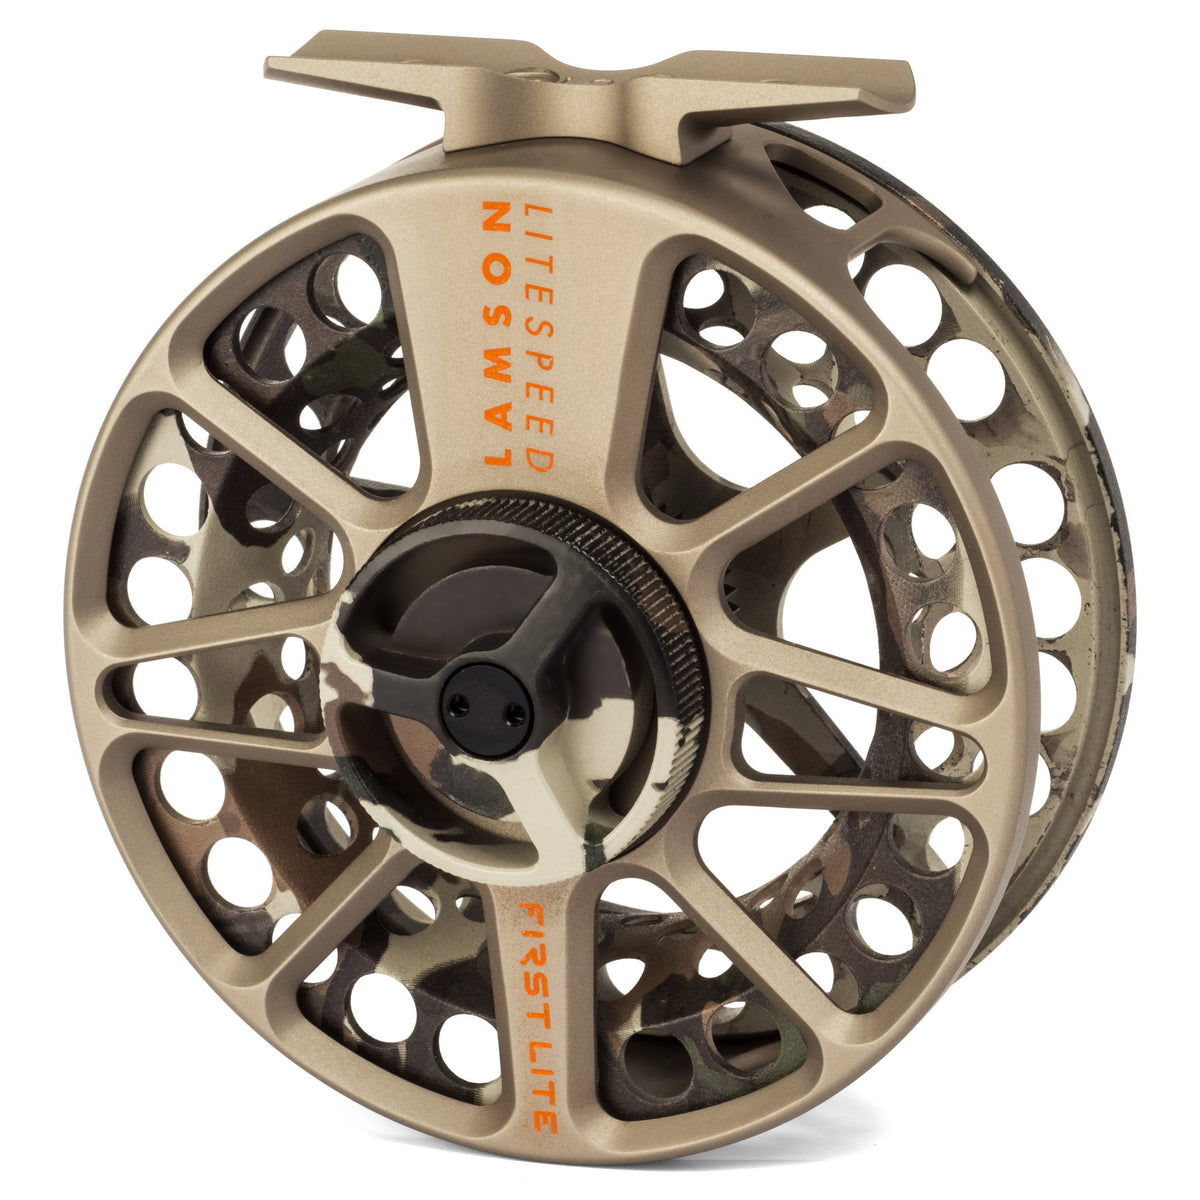 Lamson LiteSpeed G5 Fly Fishing Reel Special Edition FIRSTLITE Fusion Camo